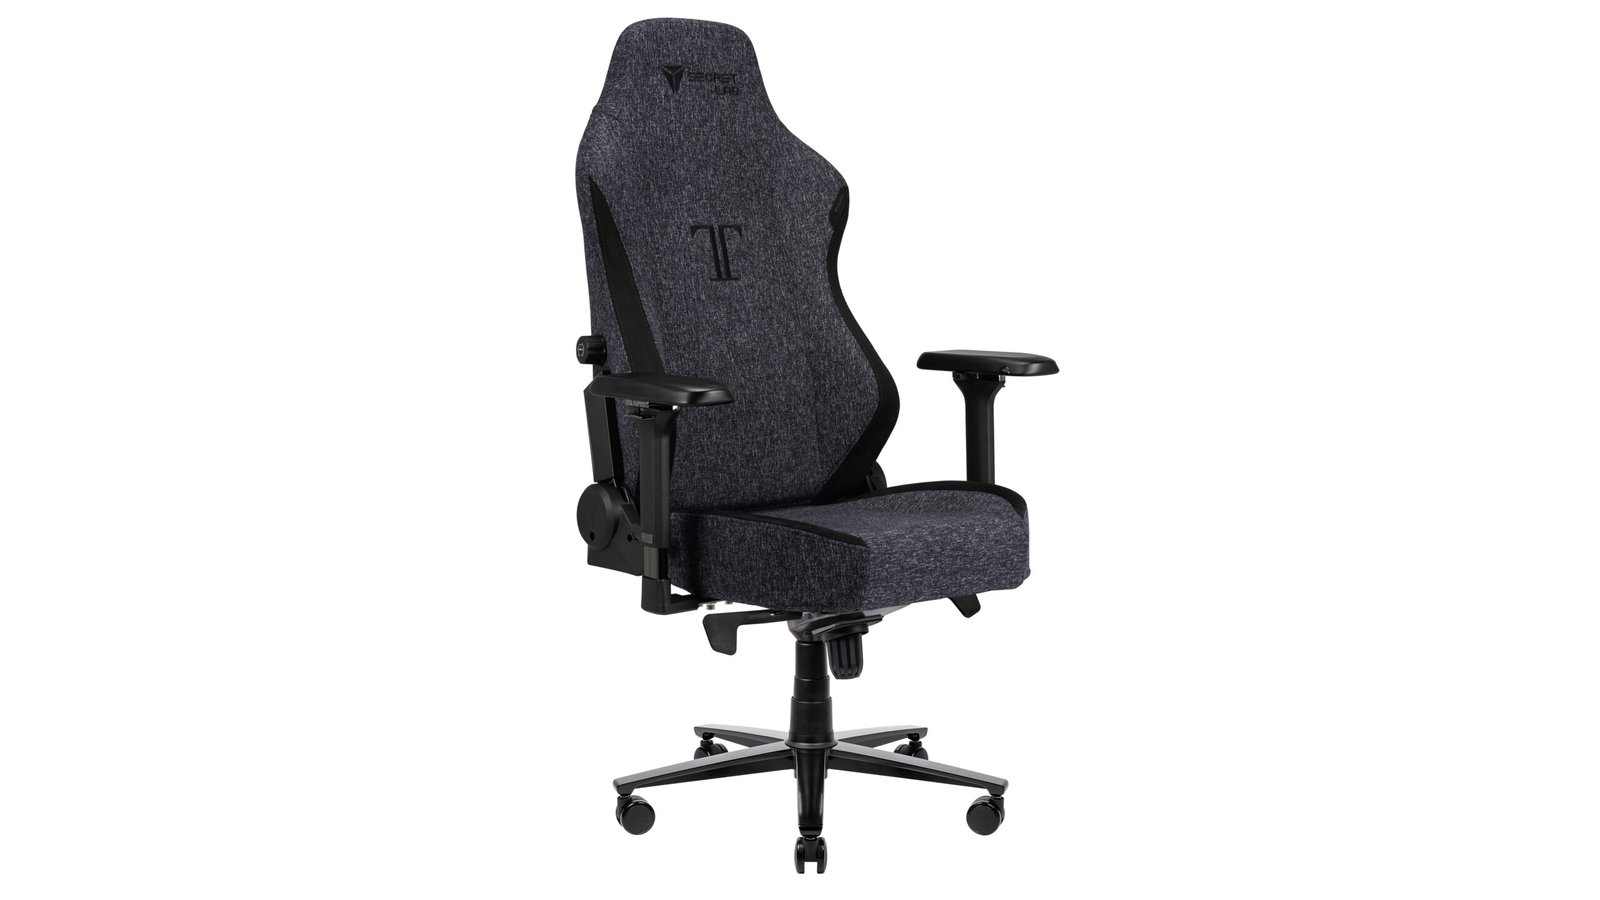 Best gaming chair 2021